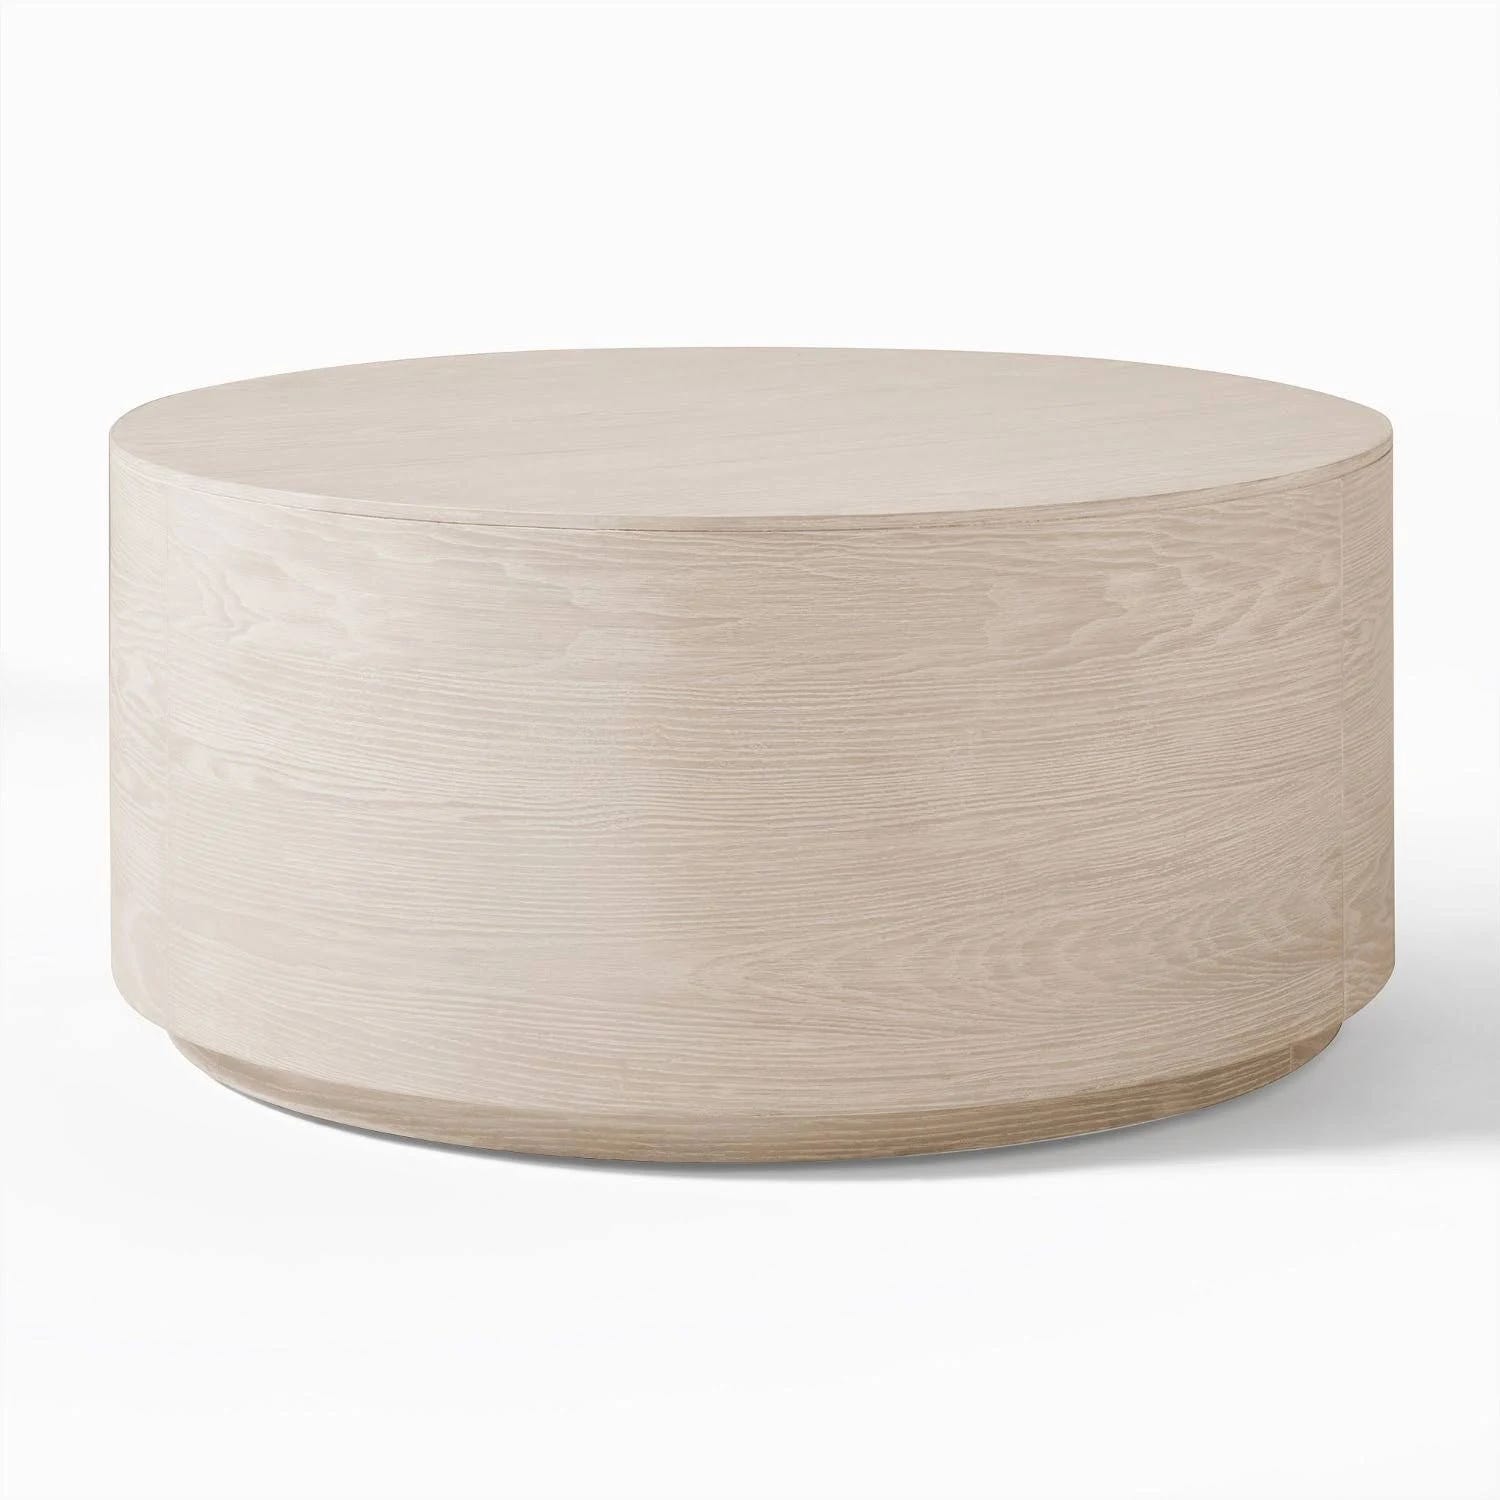 Luxurious Drum Coffee Table in White Wood | Image